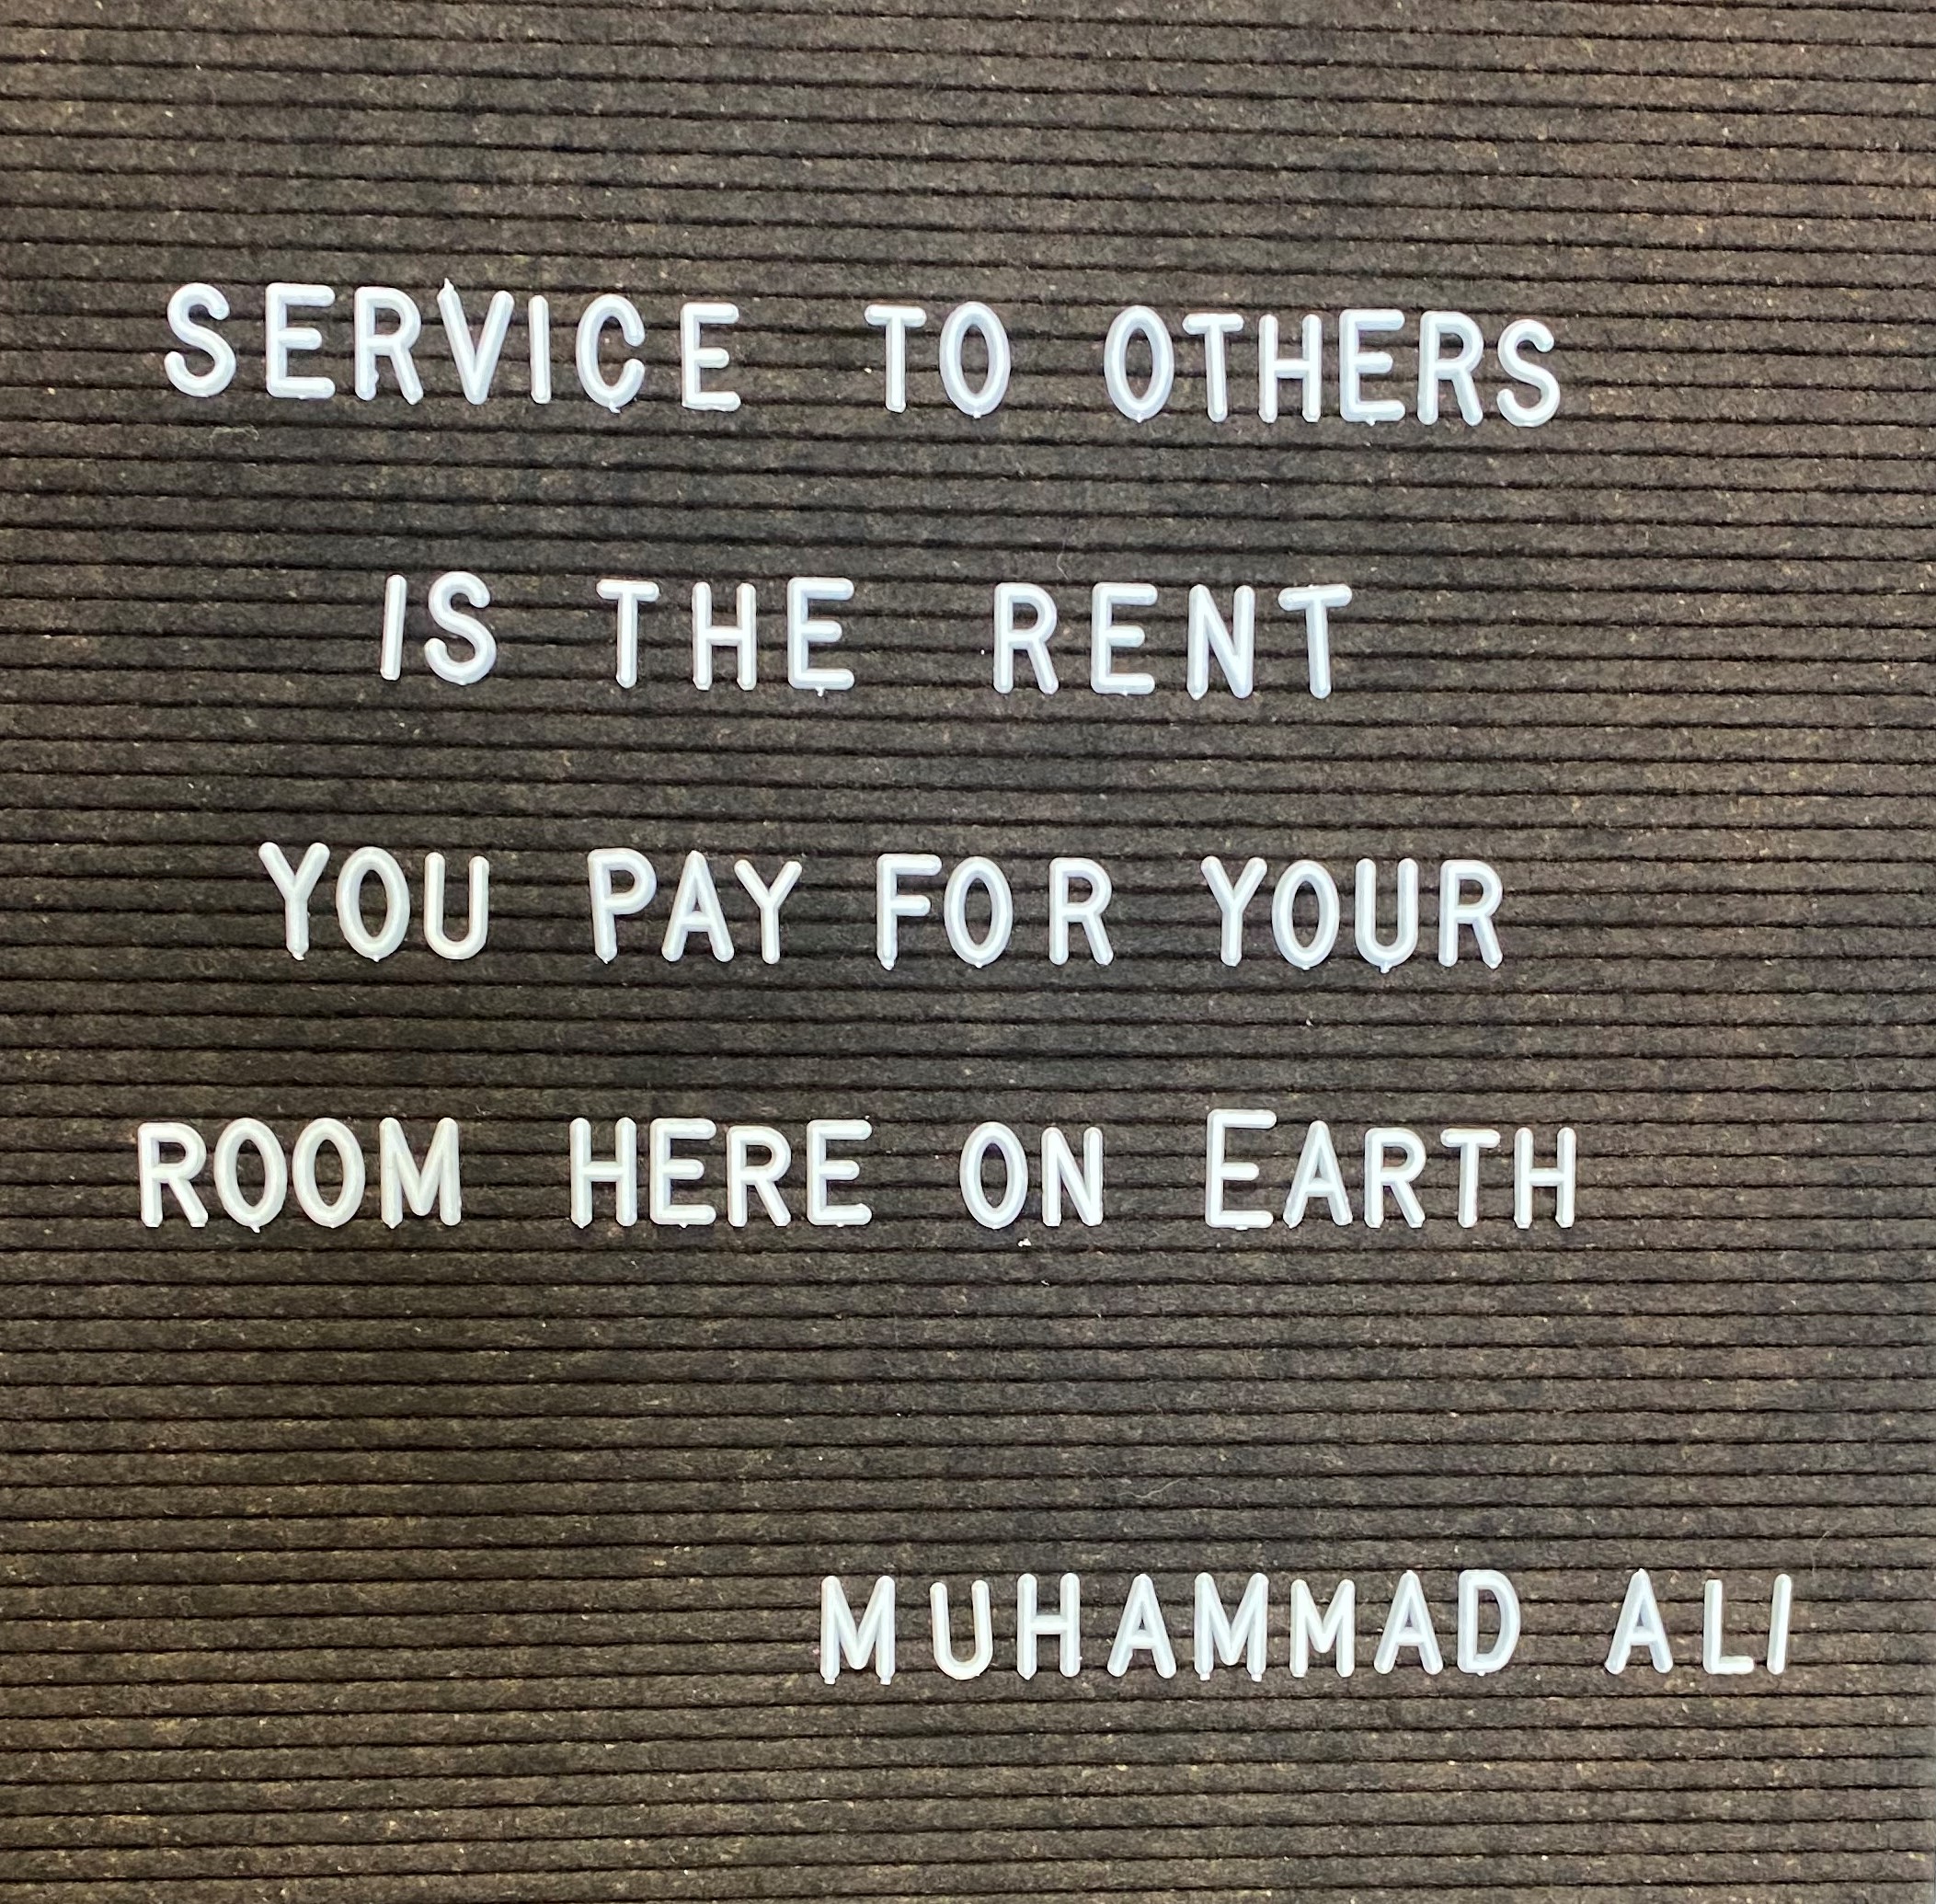 Motivational quote by Muhammad Ali